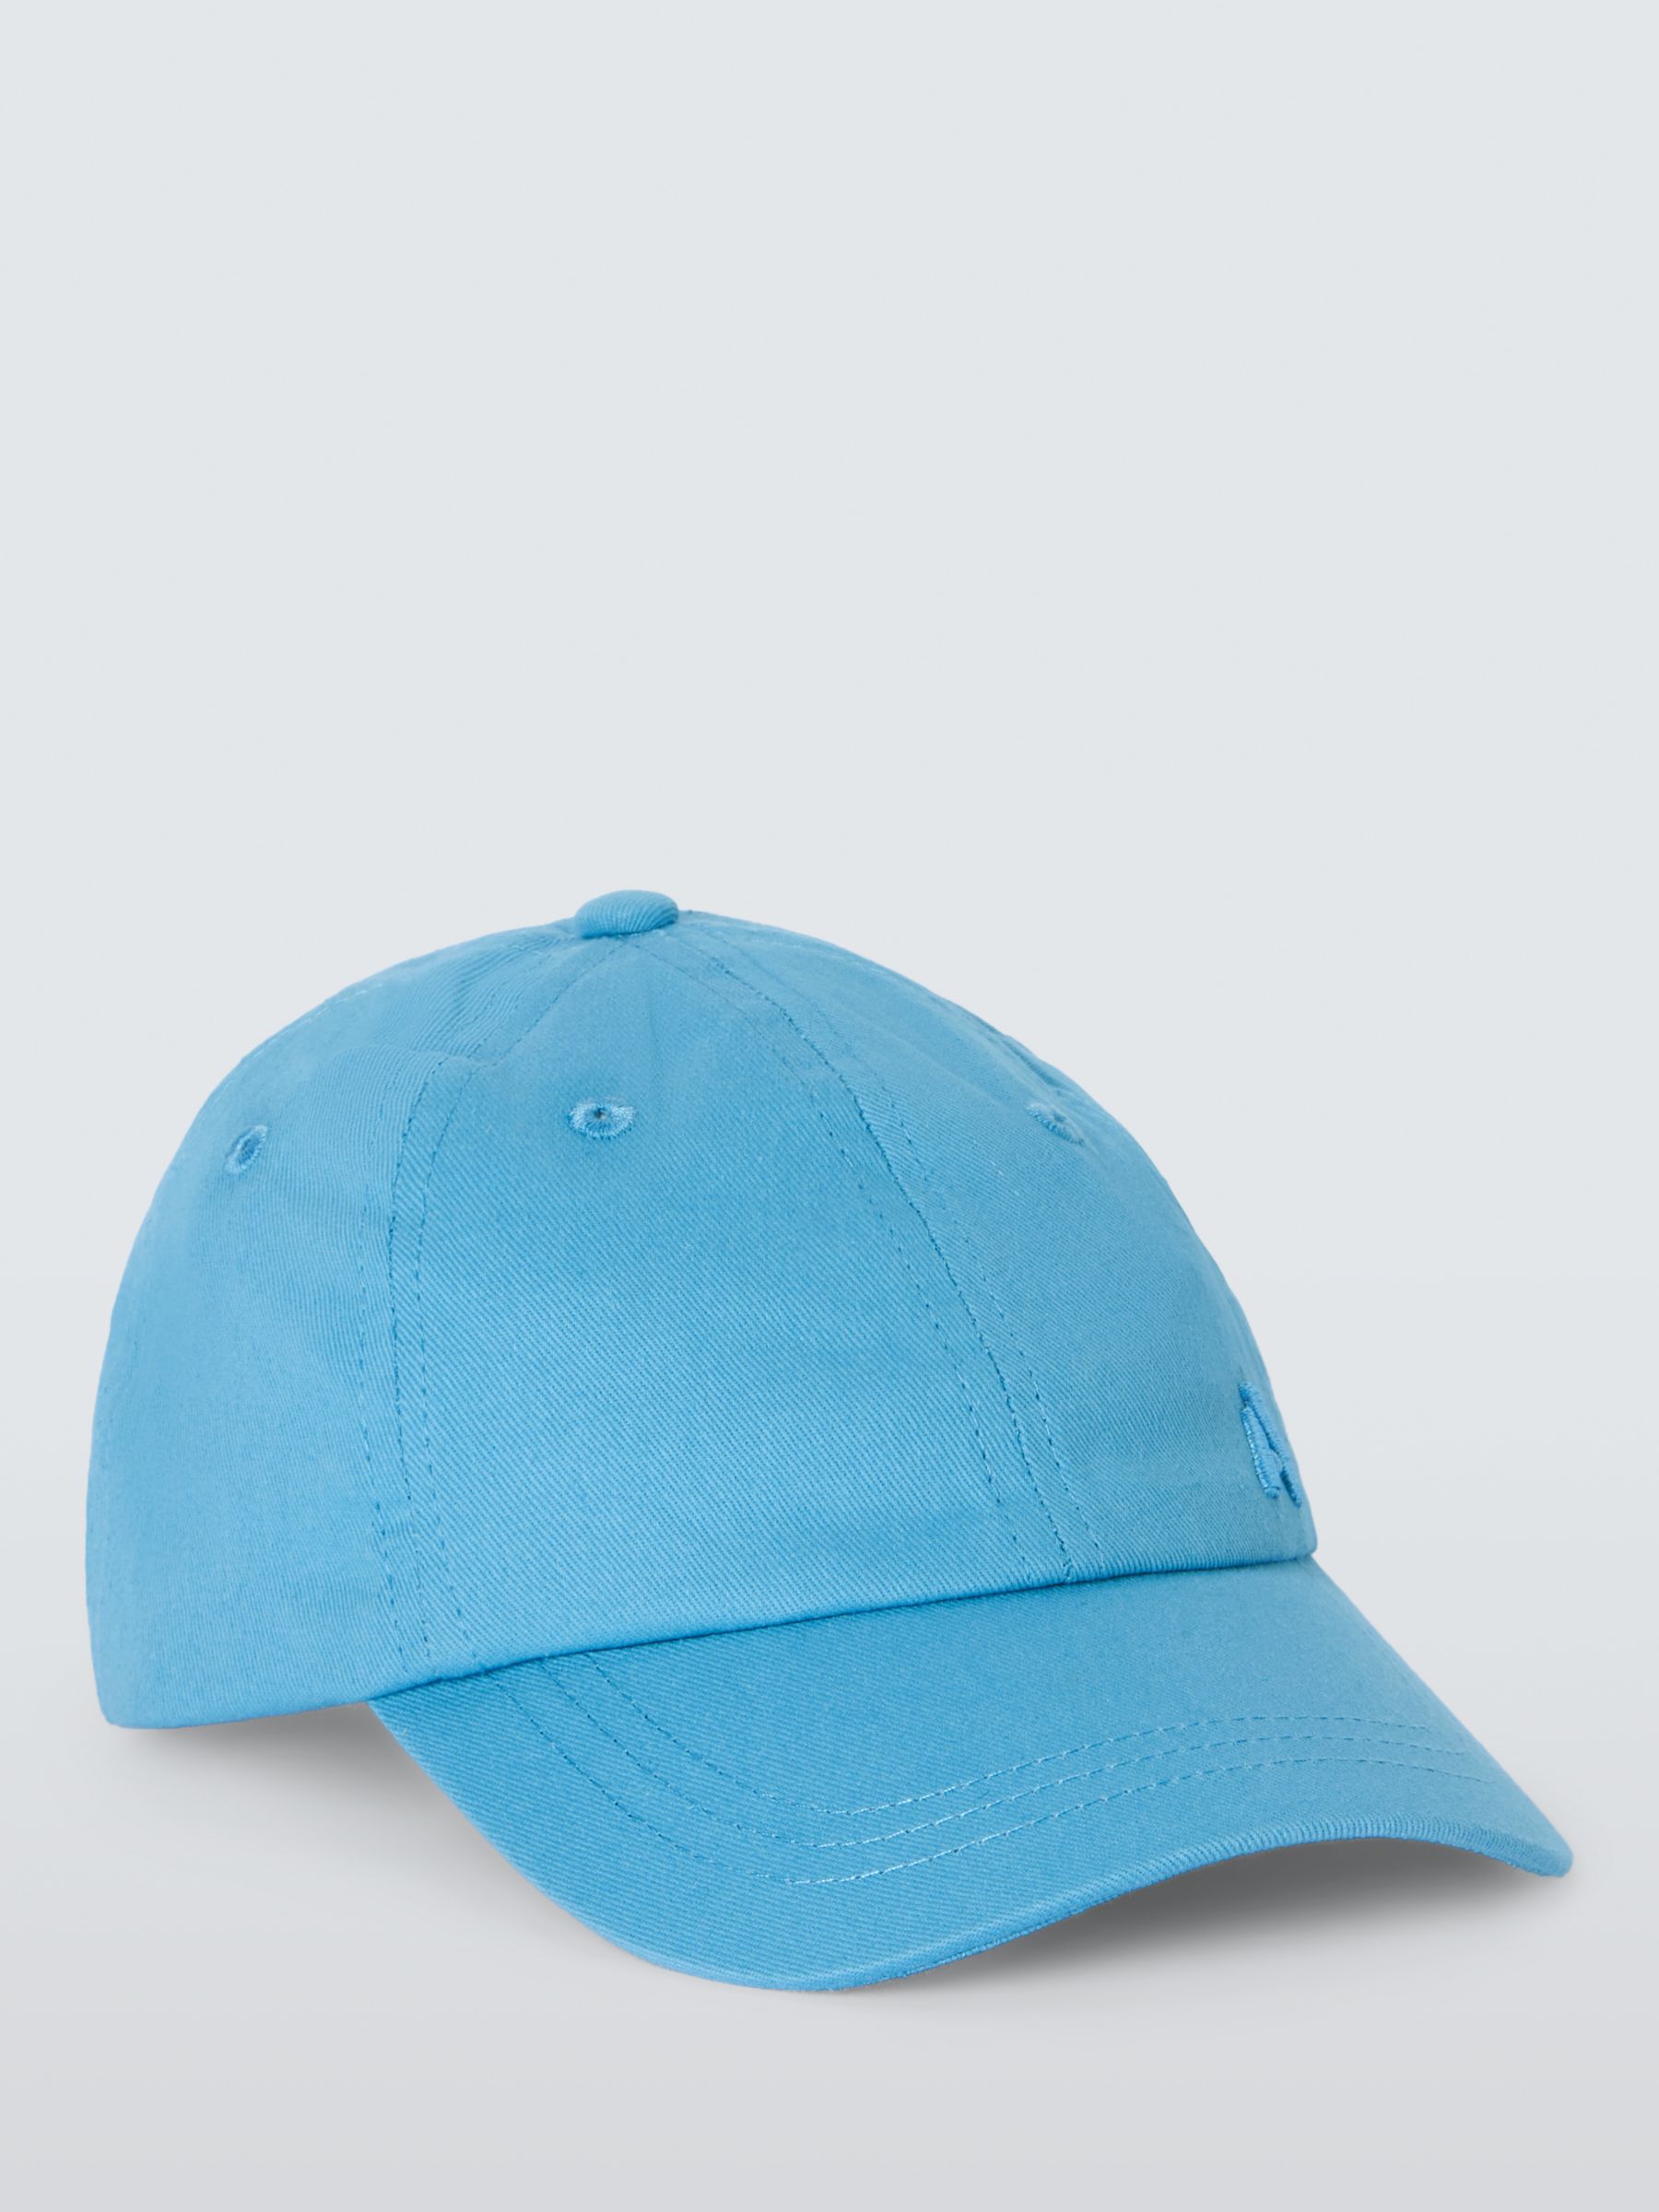 John Lewis ANYDAY Kids' Embroidered Baseball Cap, Blue, 0-6 months